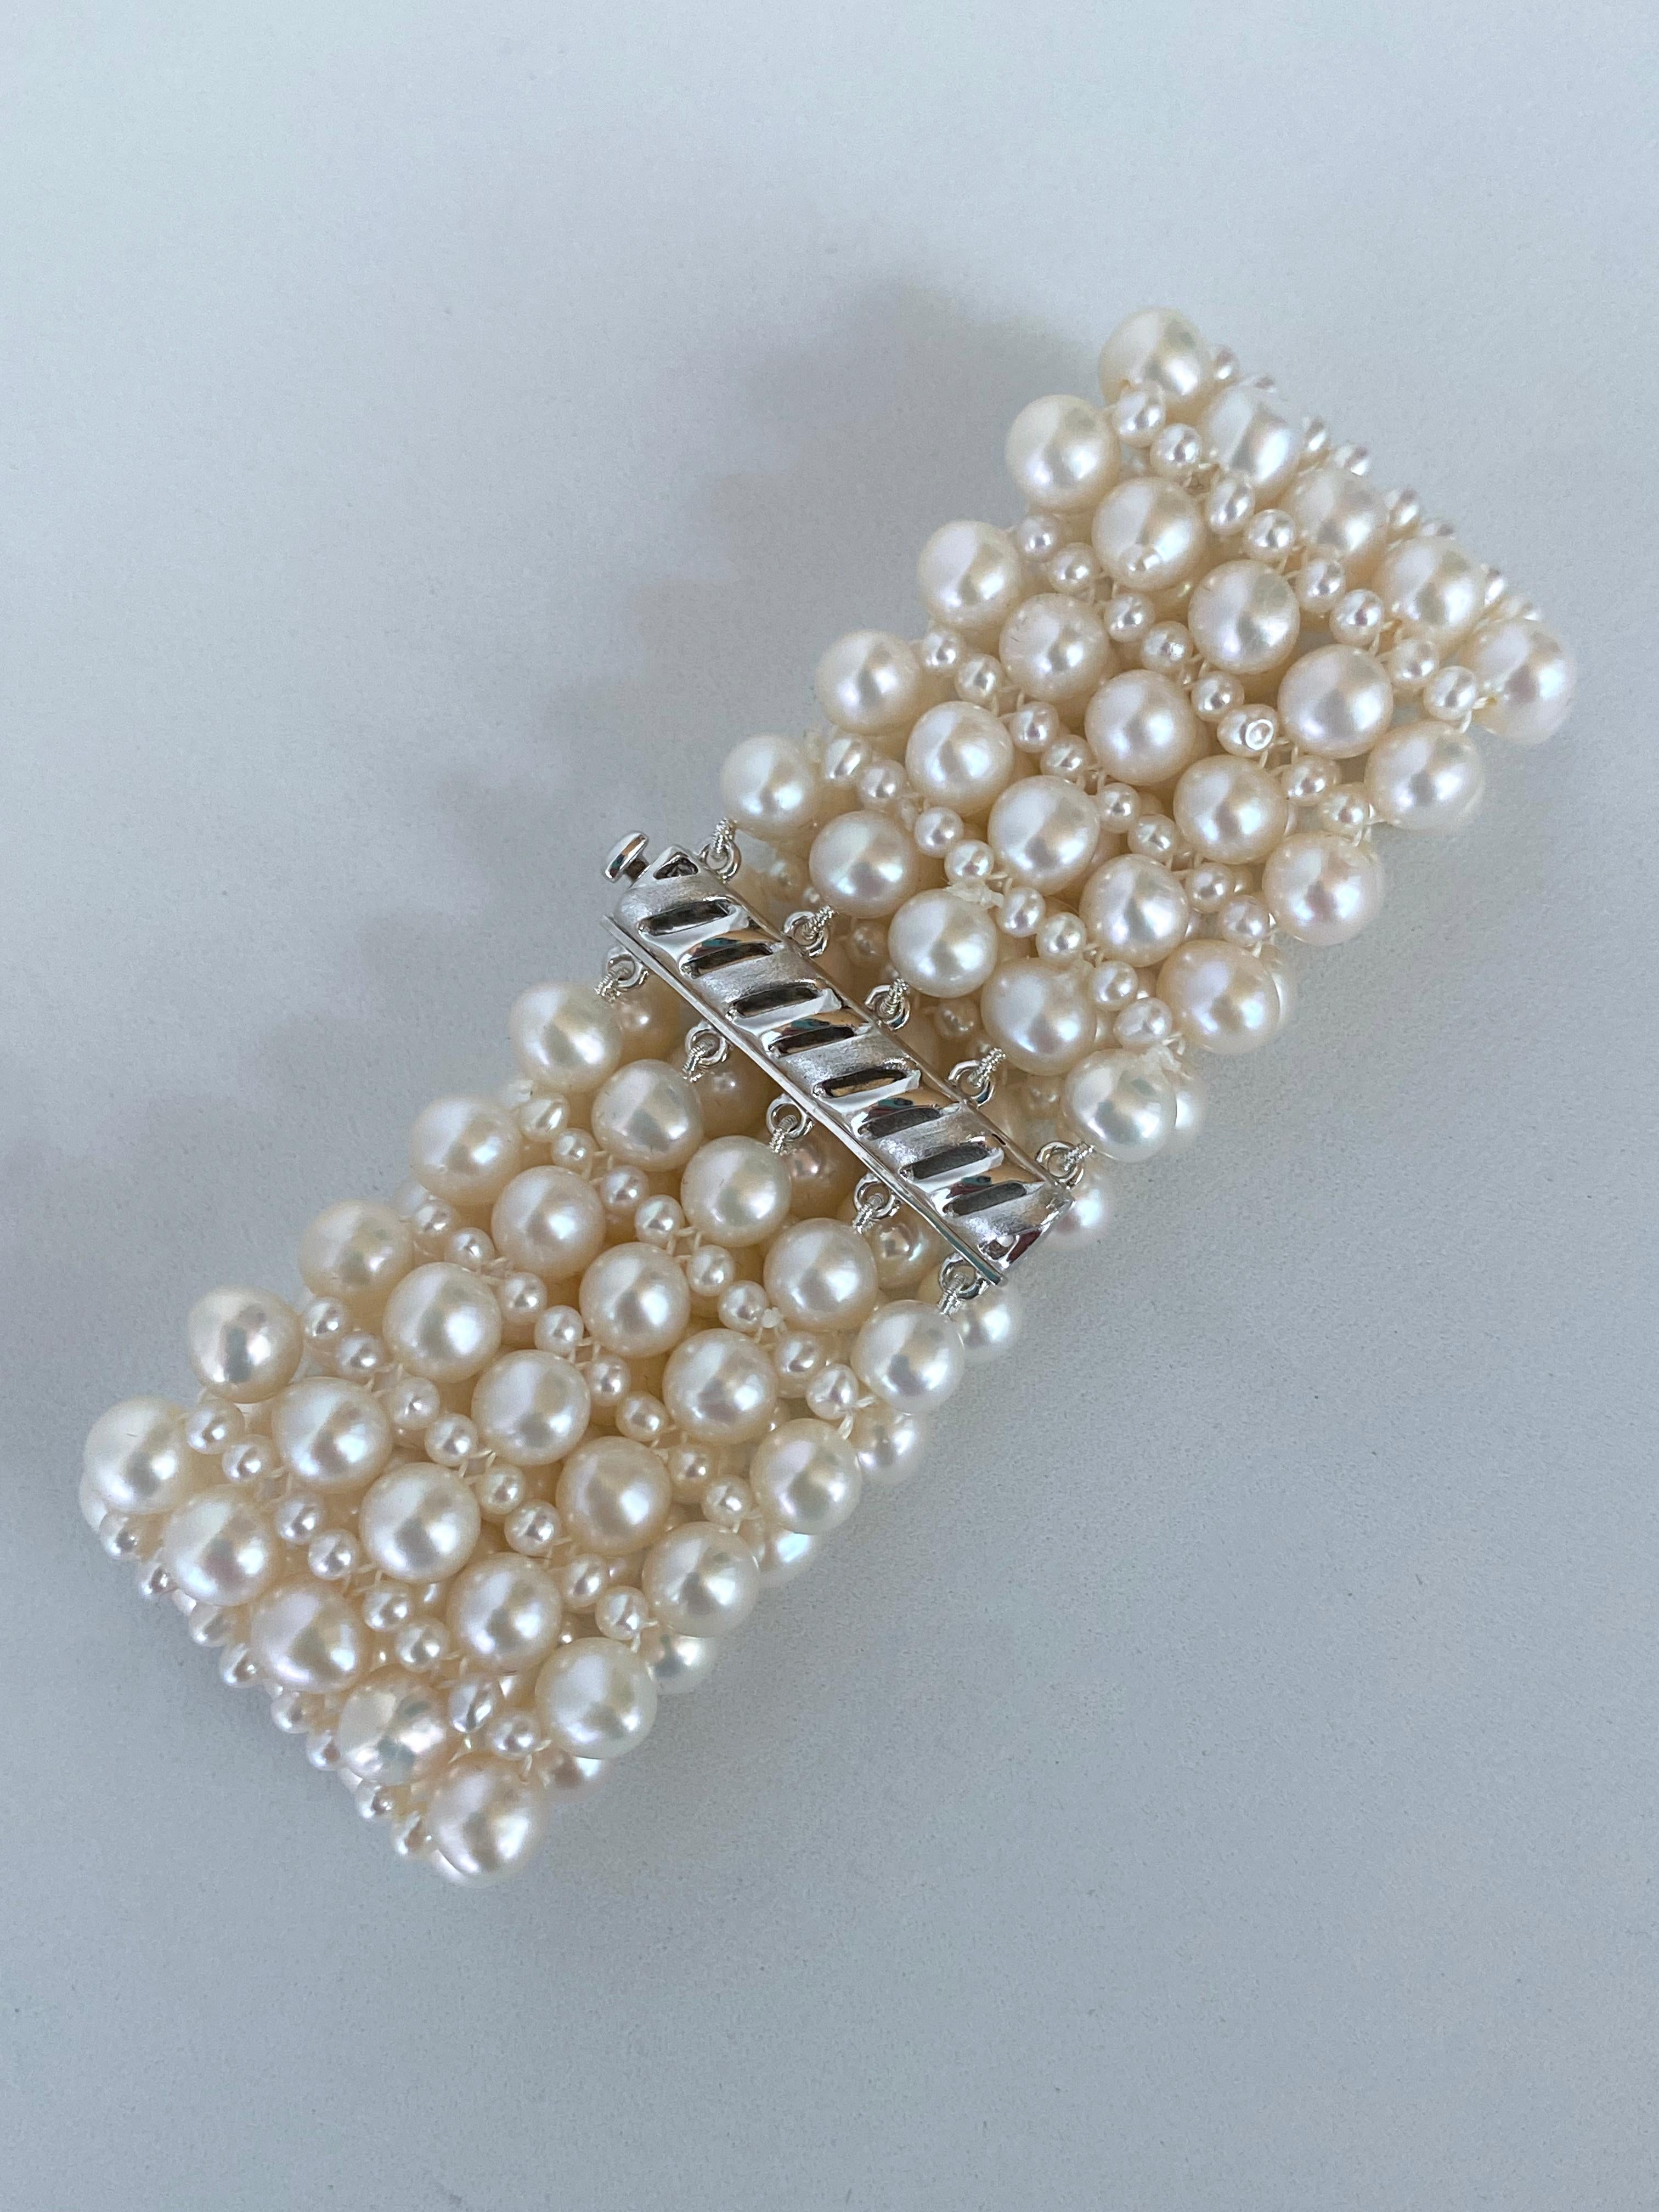 Artisan Marina J. Woven Pearl Wedding Bracelet with Rhodium Plated Silver Clasp For Sale